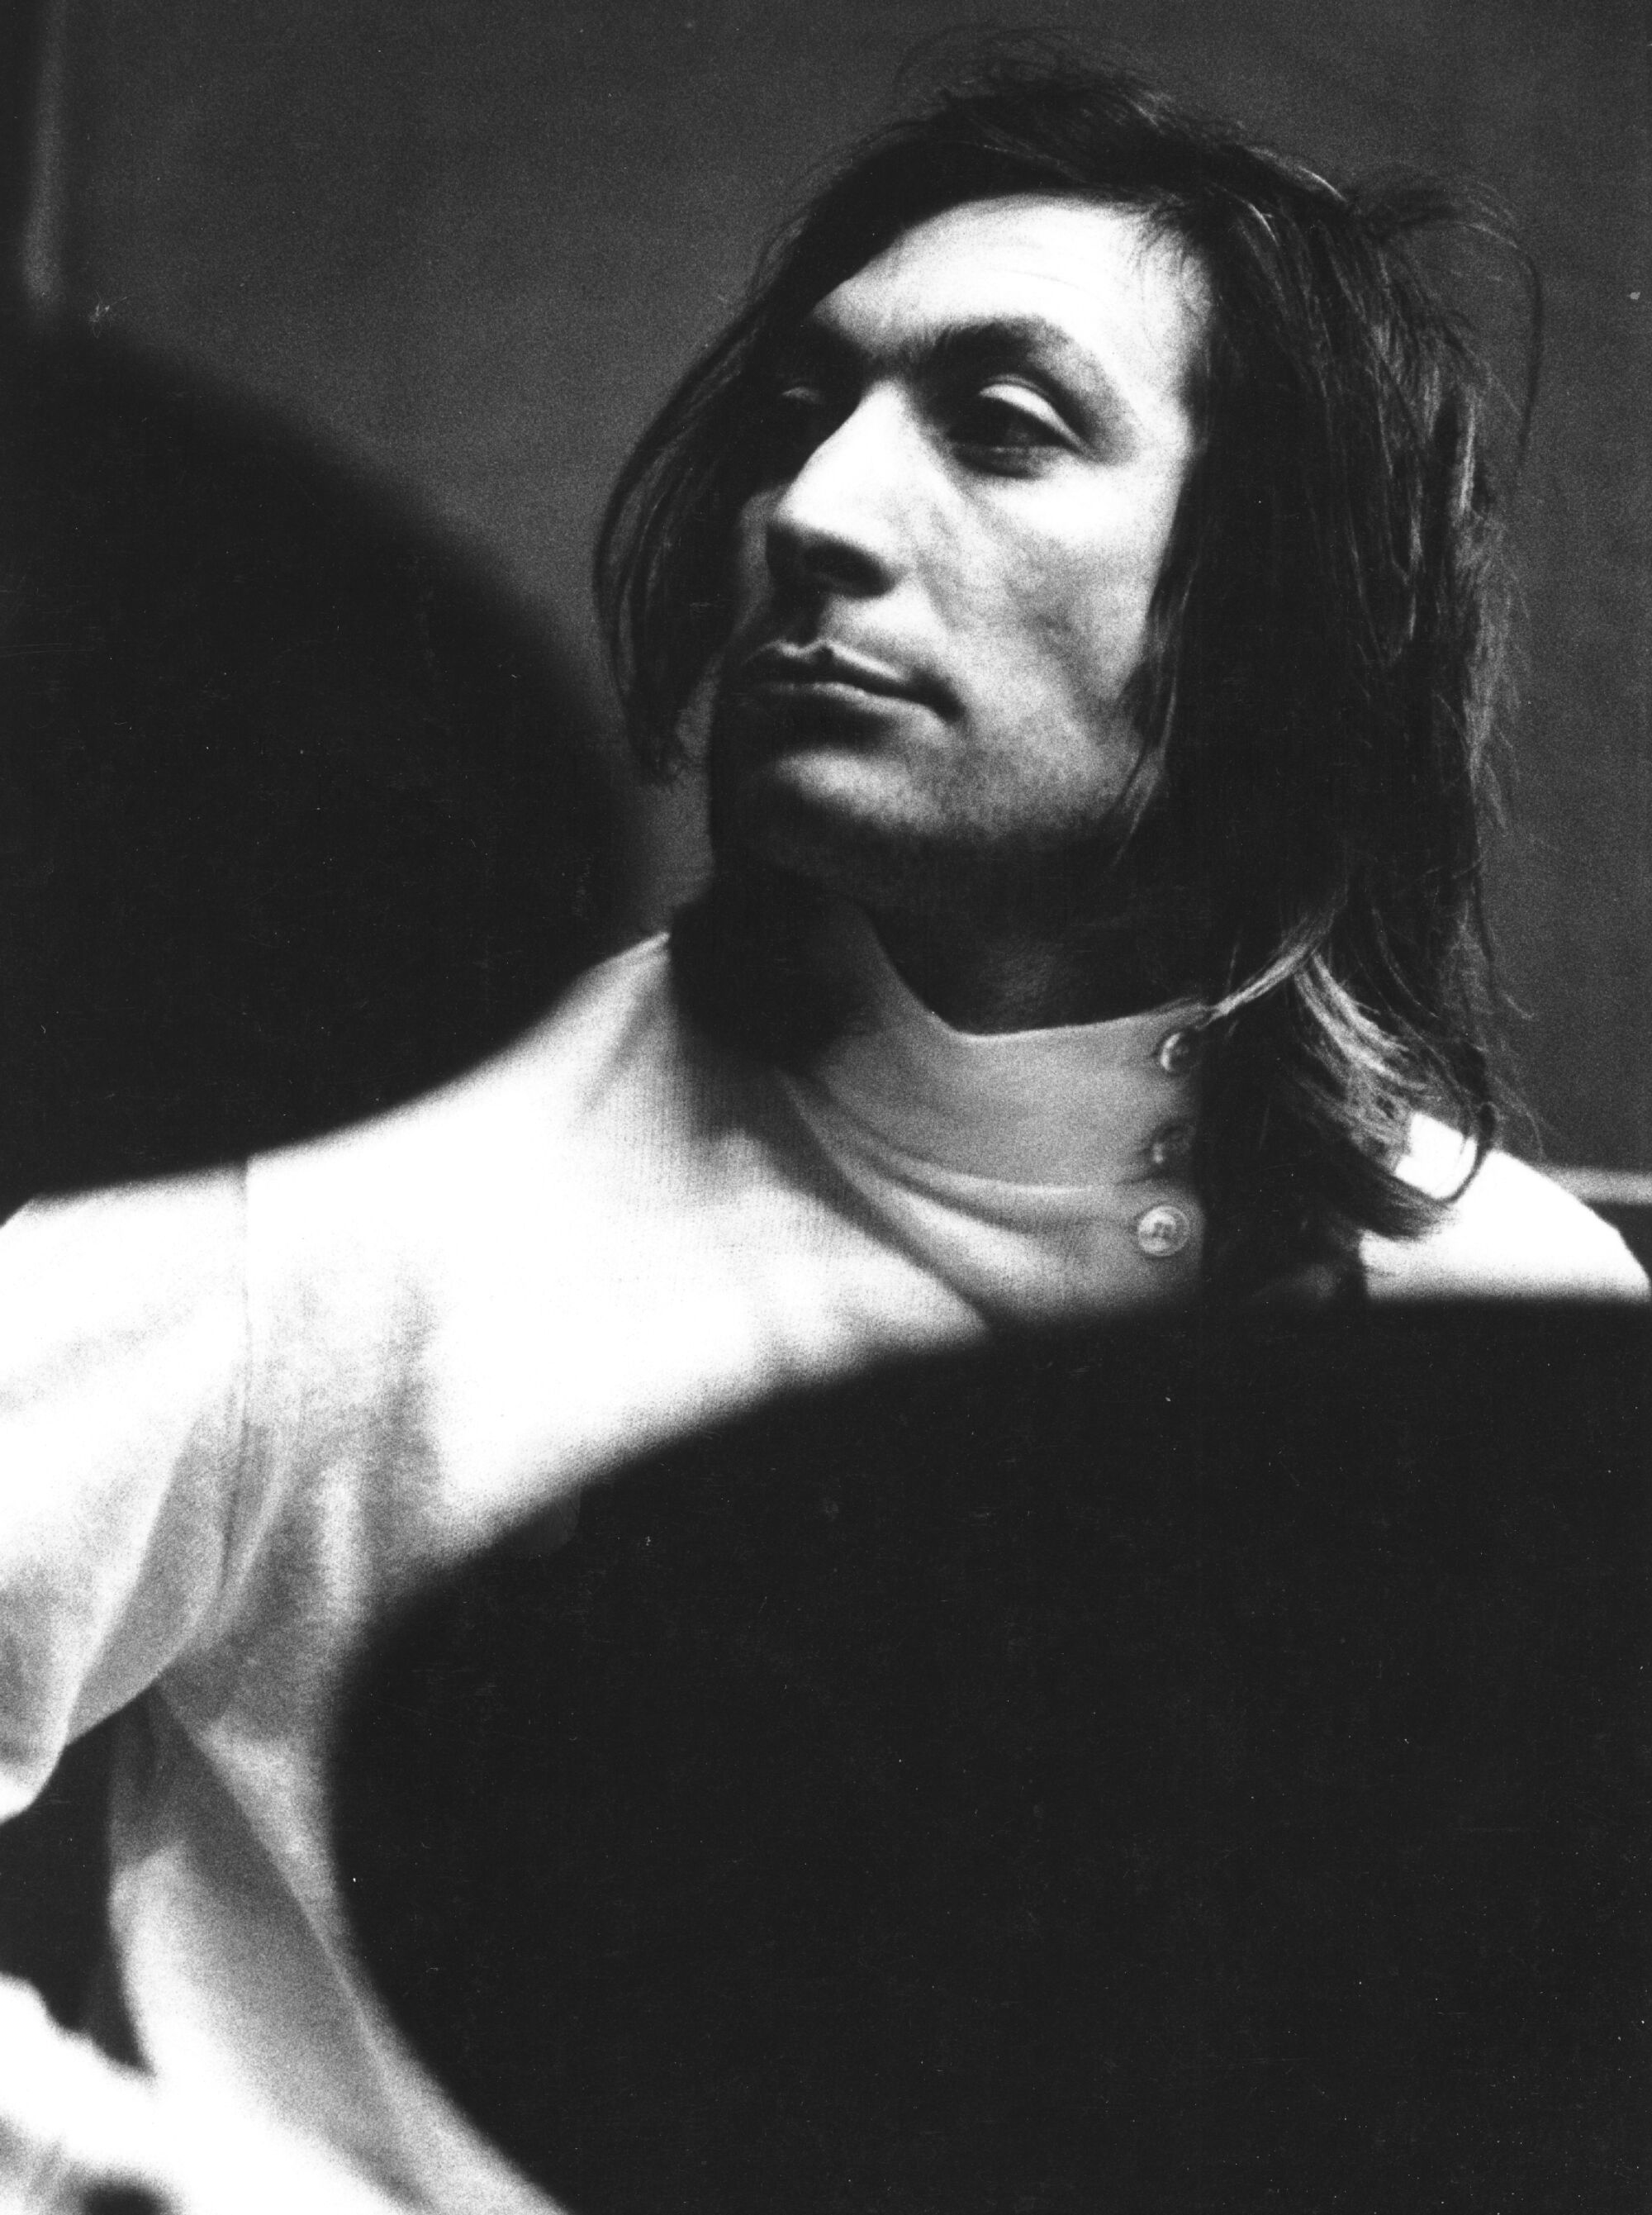 A black-and-white portrait, circa 1968, of Rolling Stones drummer Charlie Watts.